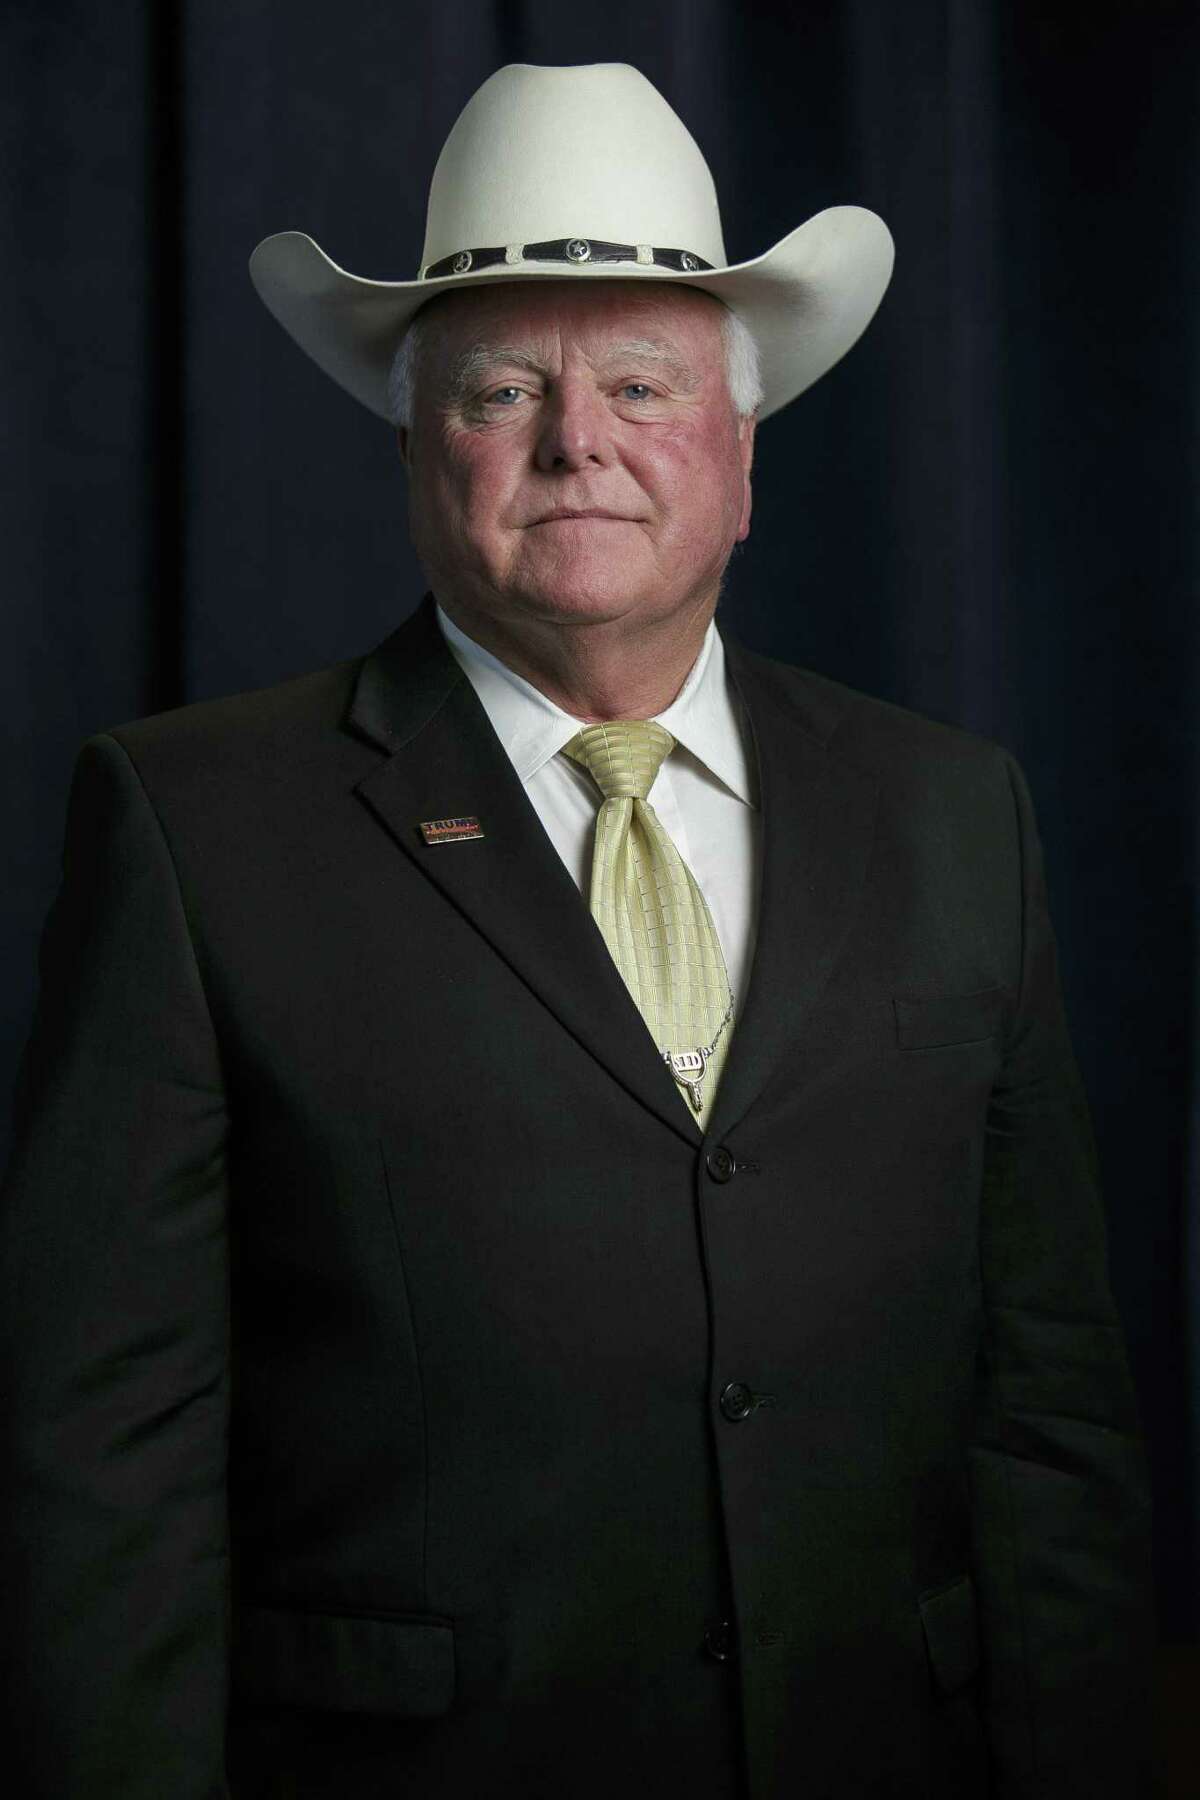 Texas Agriculture Comissioner Sid Miller in his offices in Austin Texas, Noverber 21, 2016.